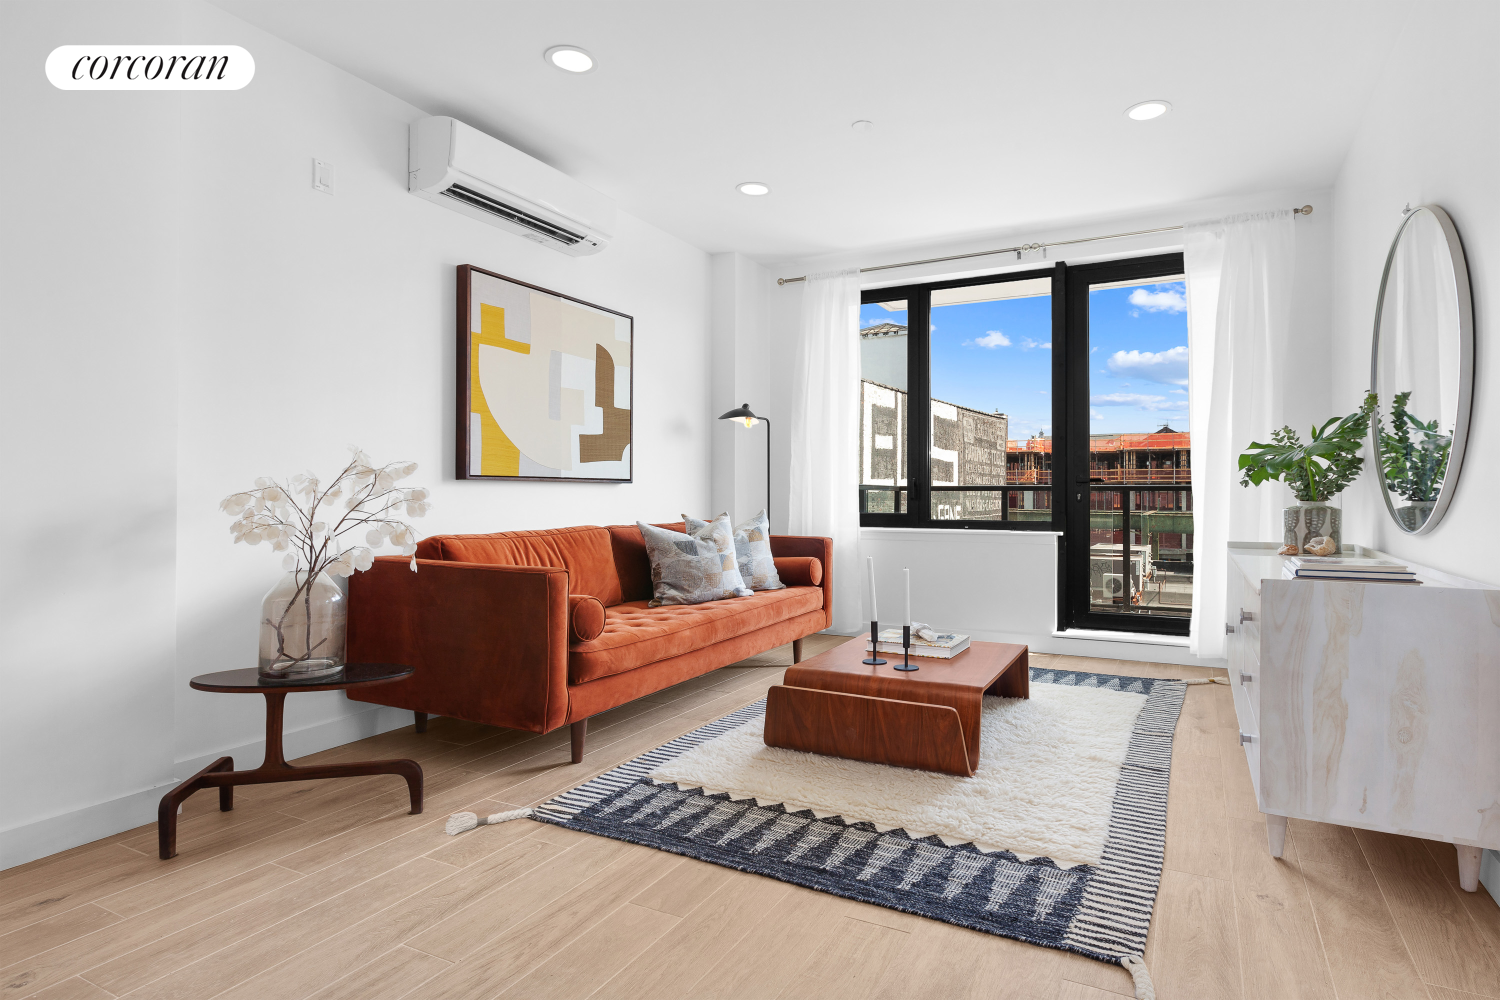 912 Broadway 60, Stuyvesant Heights, Downtown, NYC - 2 Bedrooms  
2 Bathrooms  
3 Rooms - 